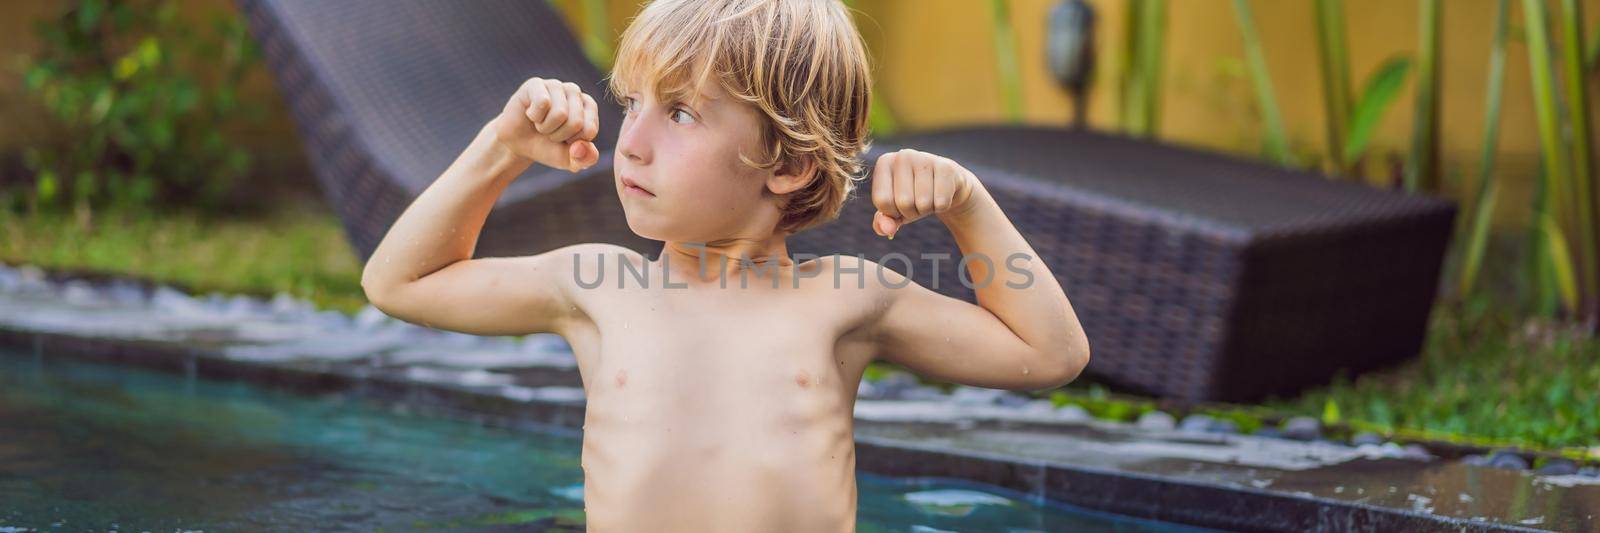 A boy shows his muscles after swimming. BANNER, LONG FORMAT